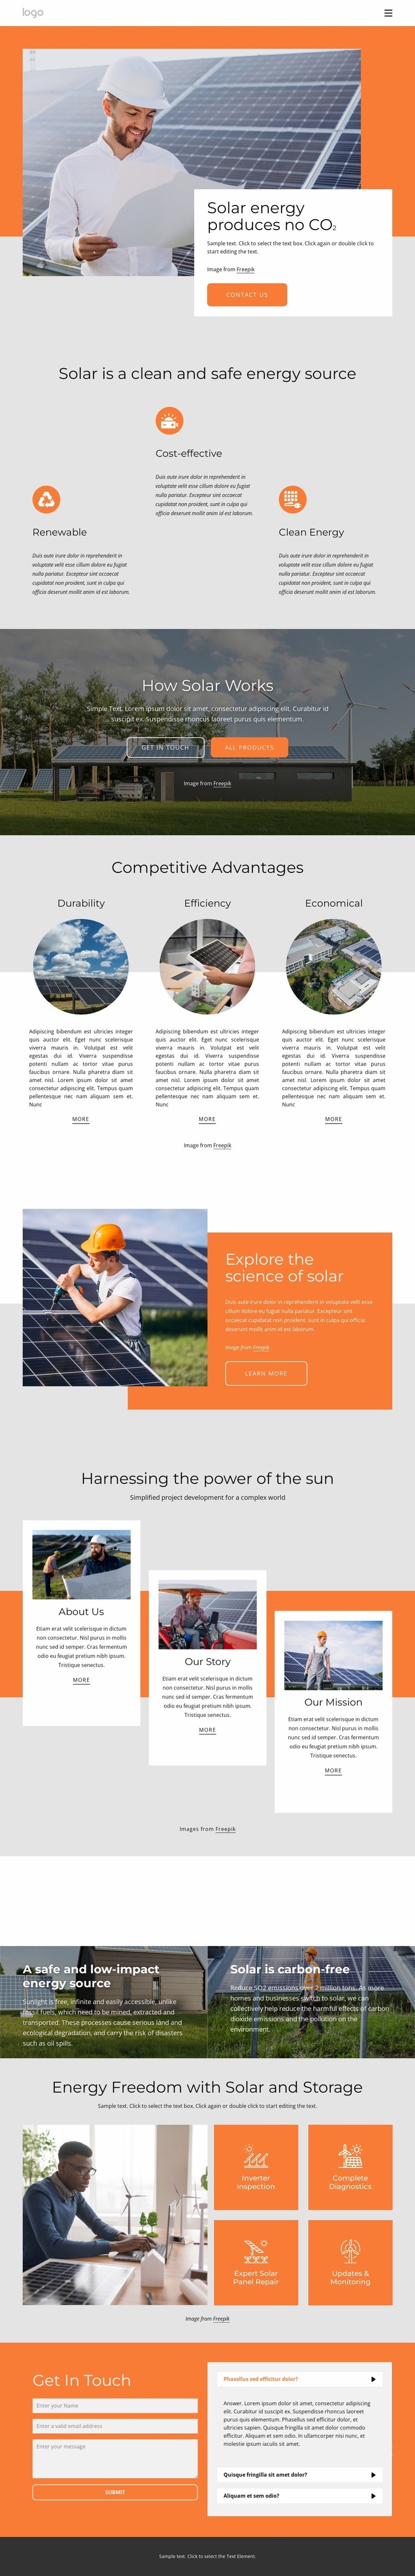 Power your home with clean solar energy Homepage Design